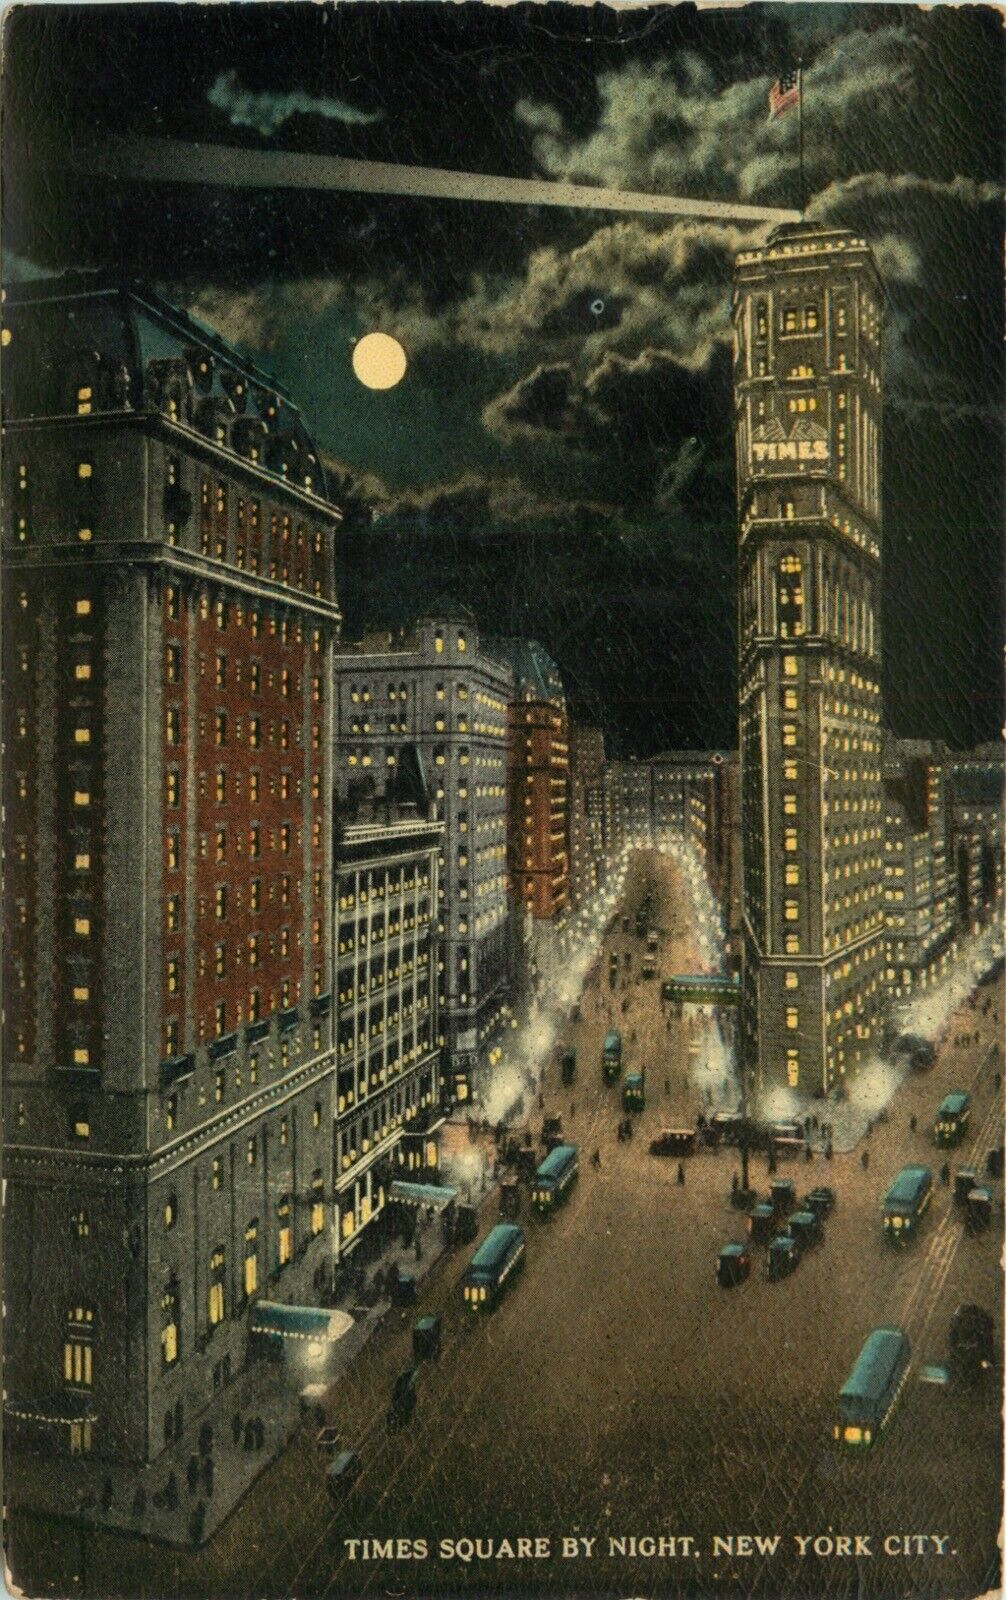 Times Square, By Night, New York City, Vintage Postcard - H. Finkelstein